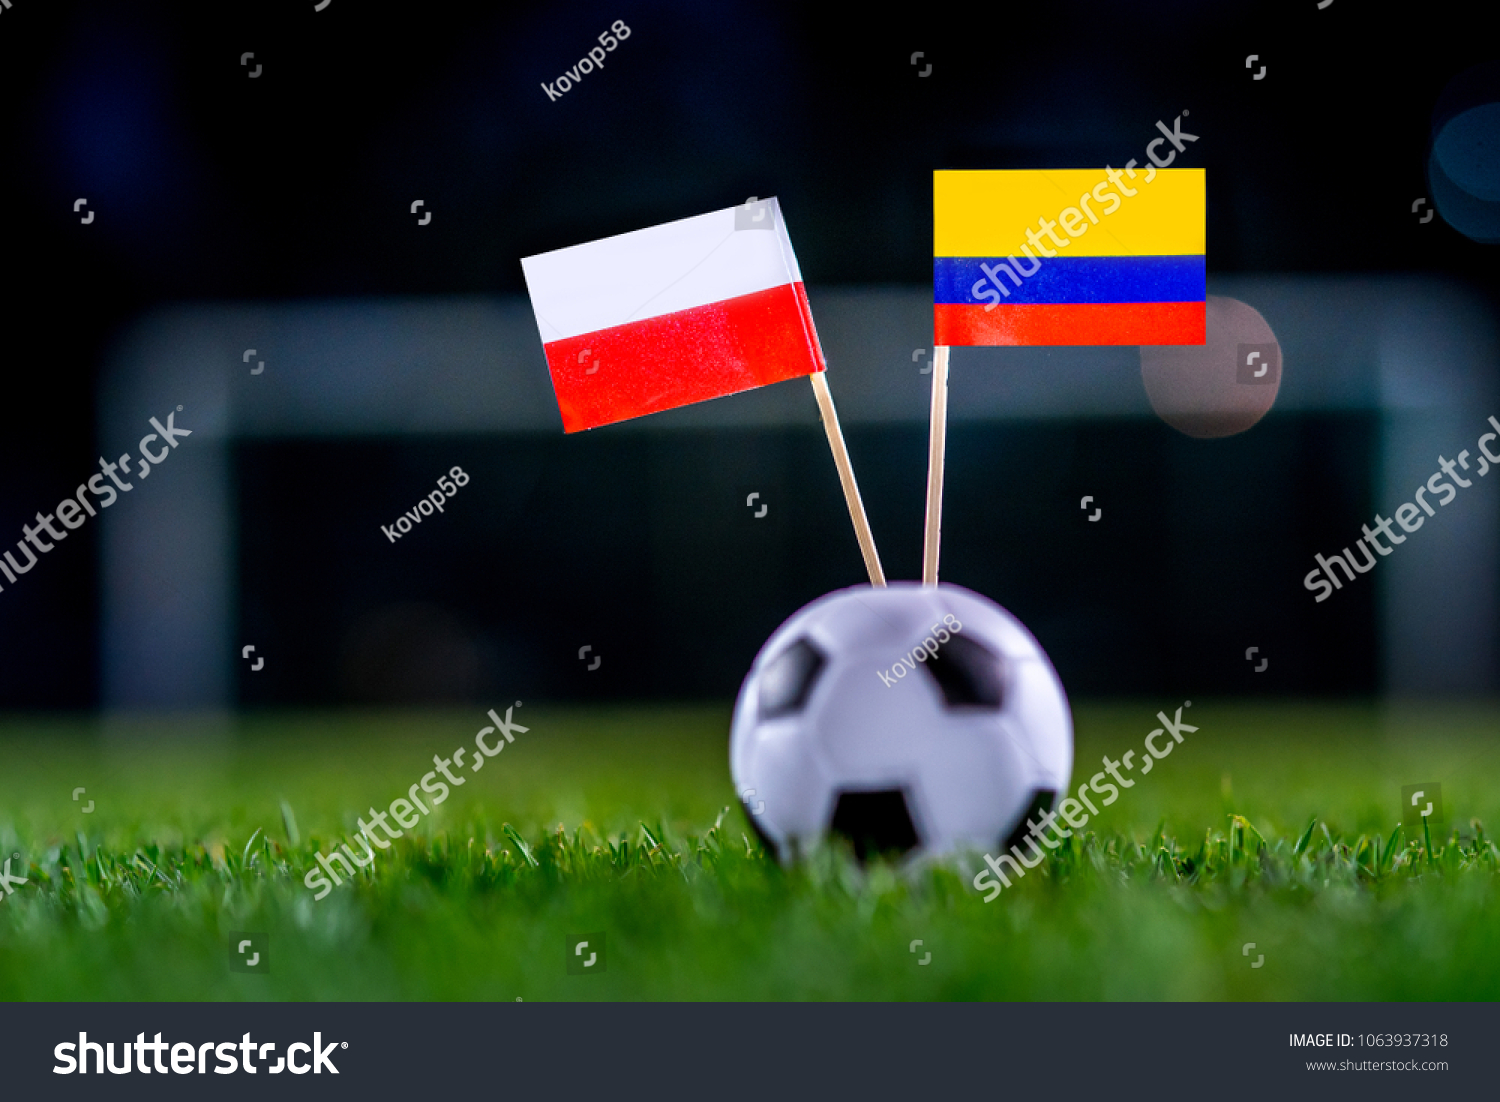 Poland - Columbia, Group H, Sunday, 24. June, Football, National Flags on green grass, white football ball on ground. #1063937318